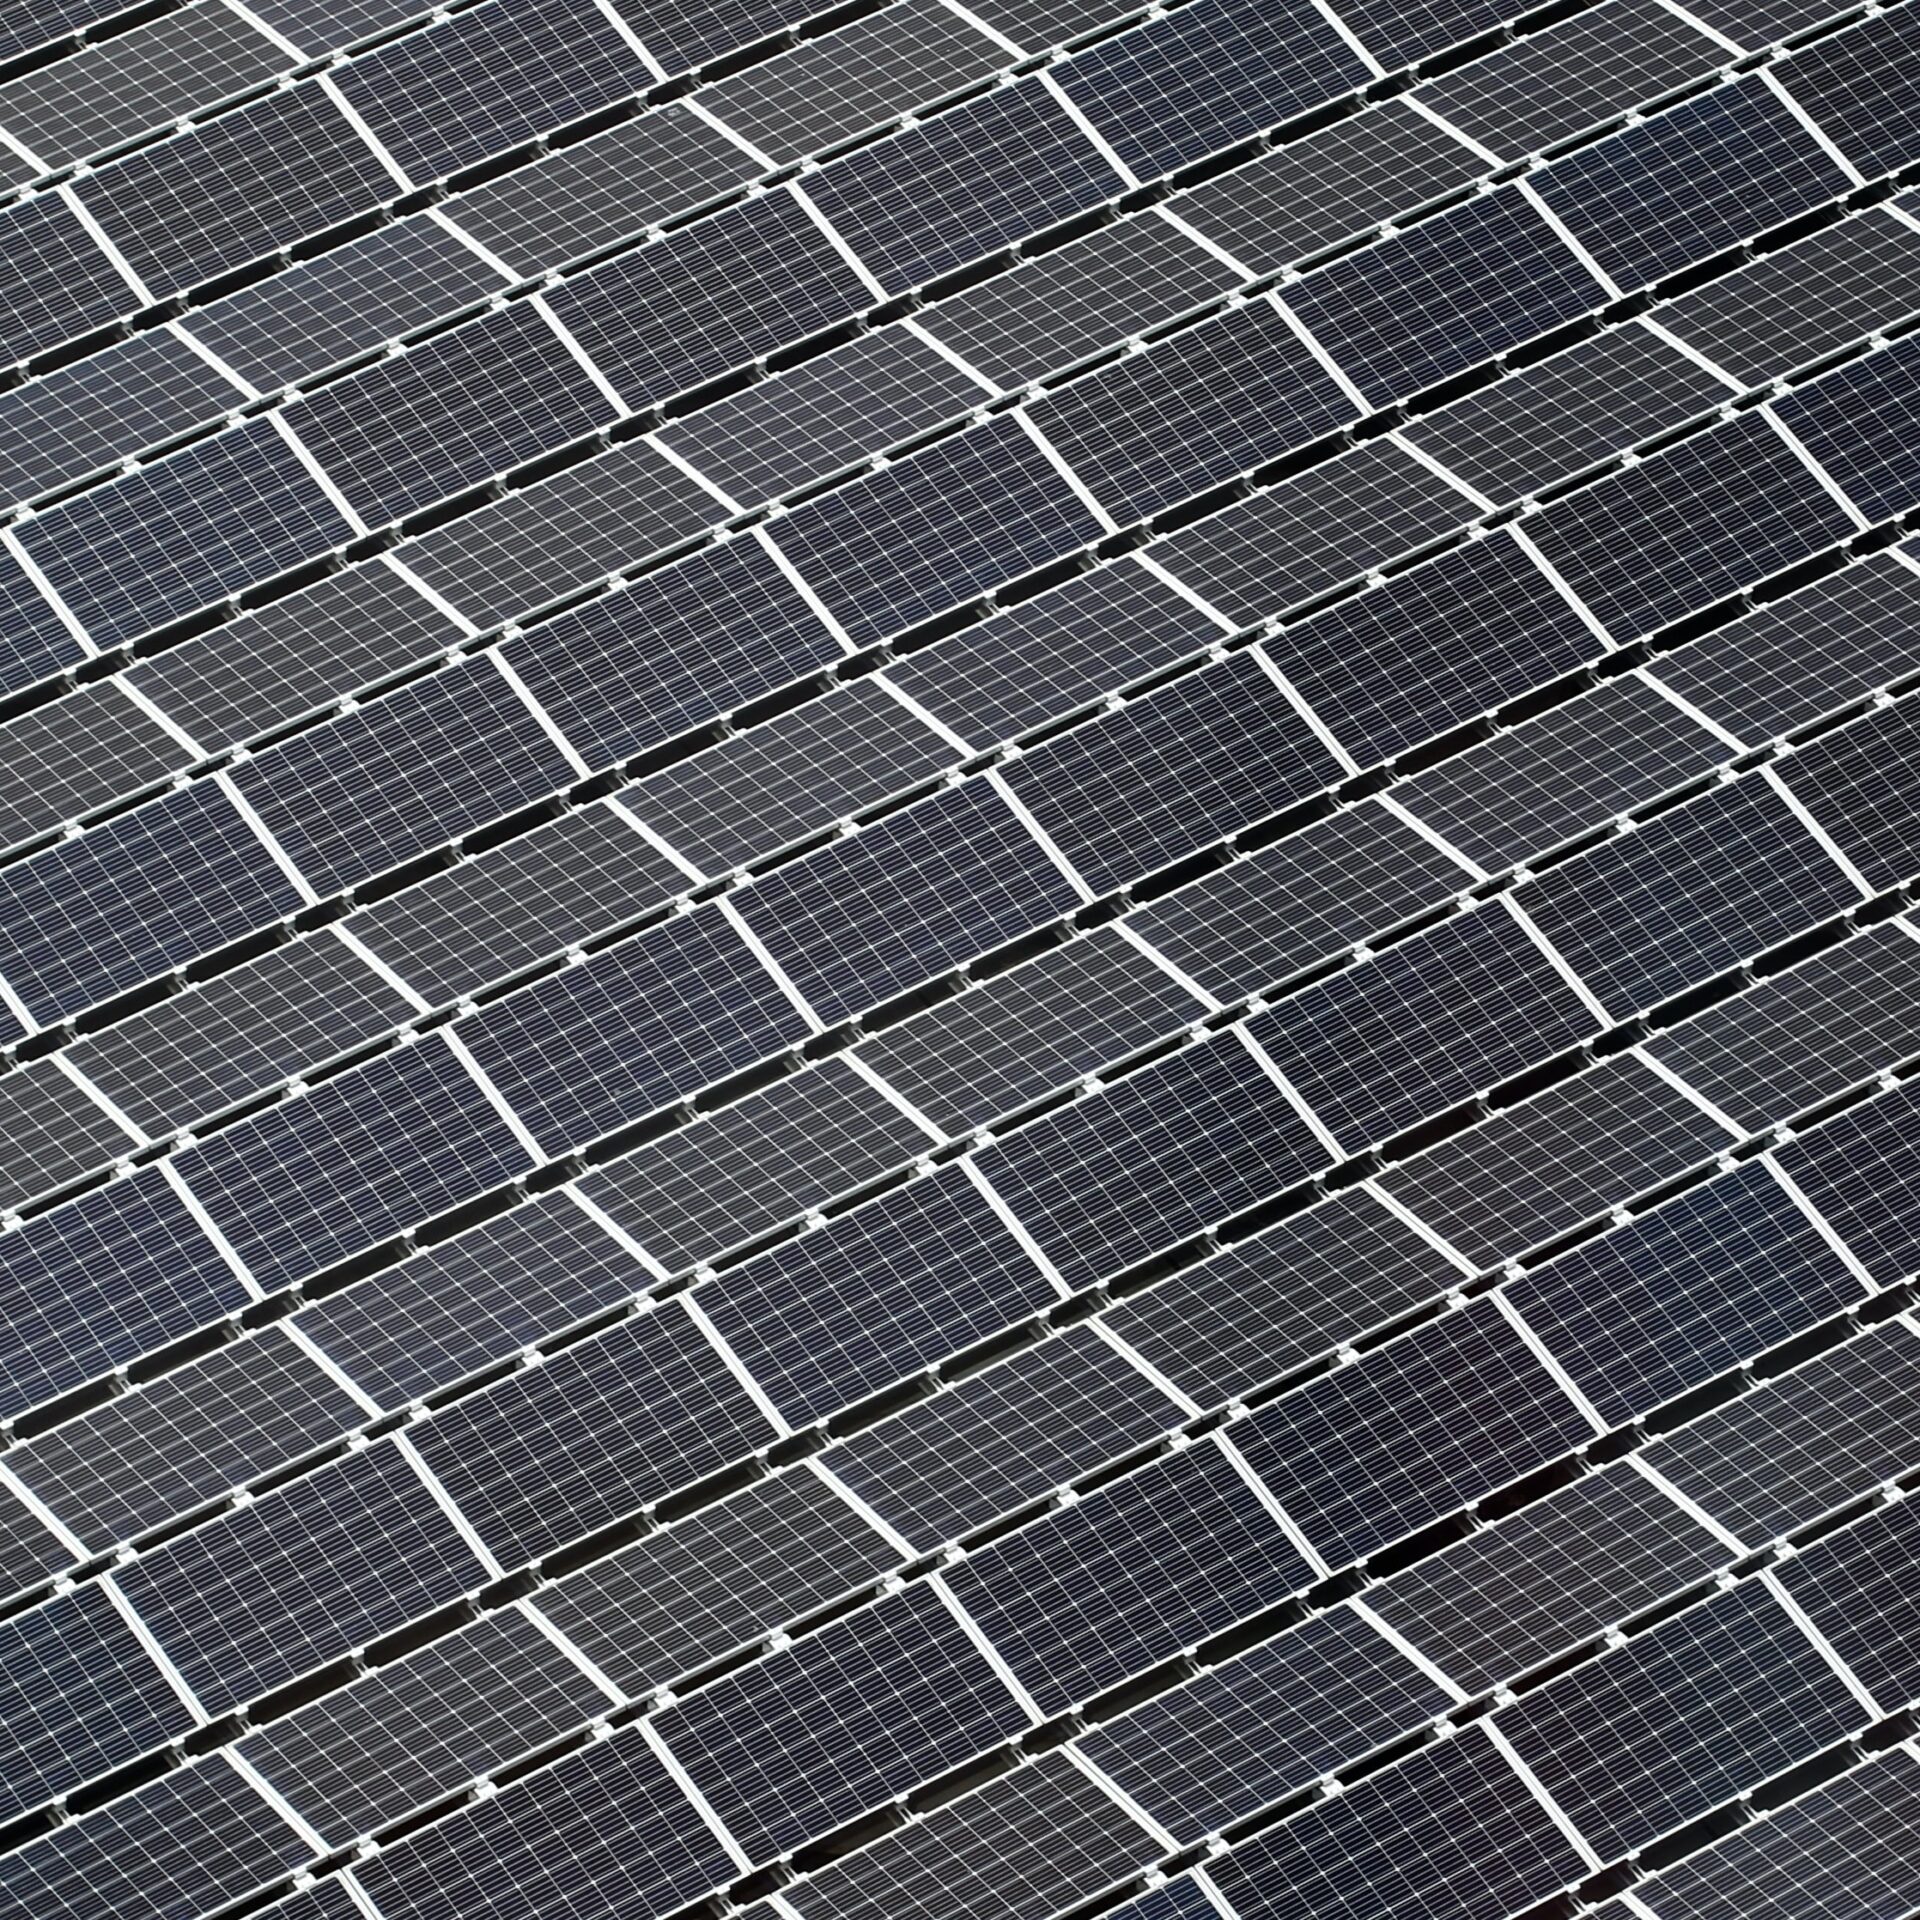 Aerial view of a solar panel array.